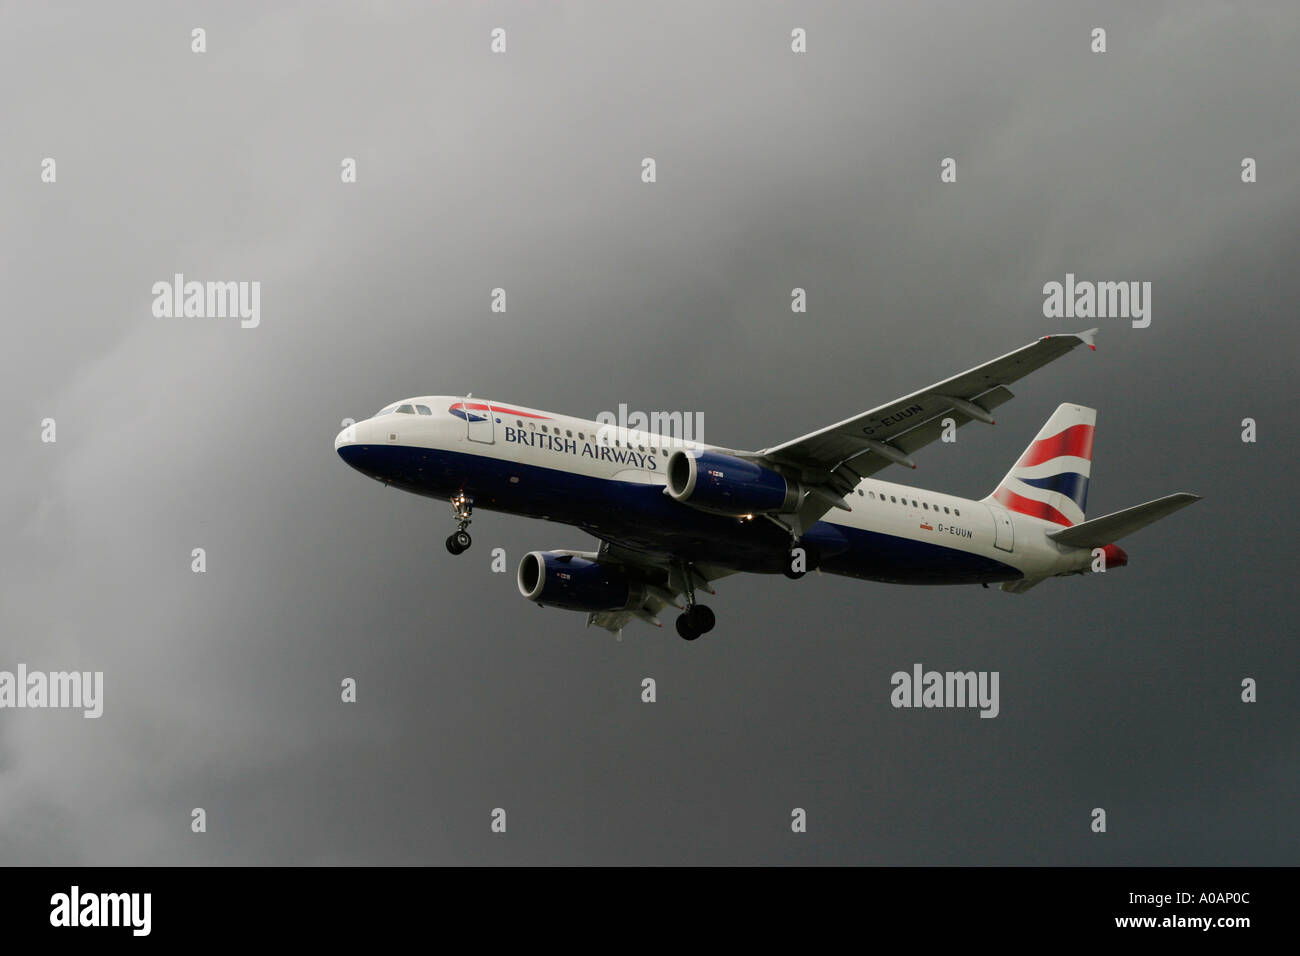 British Airways Airbus A320 flying in a bad weather condition London Heathrow UK Stock Photo